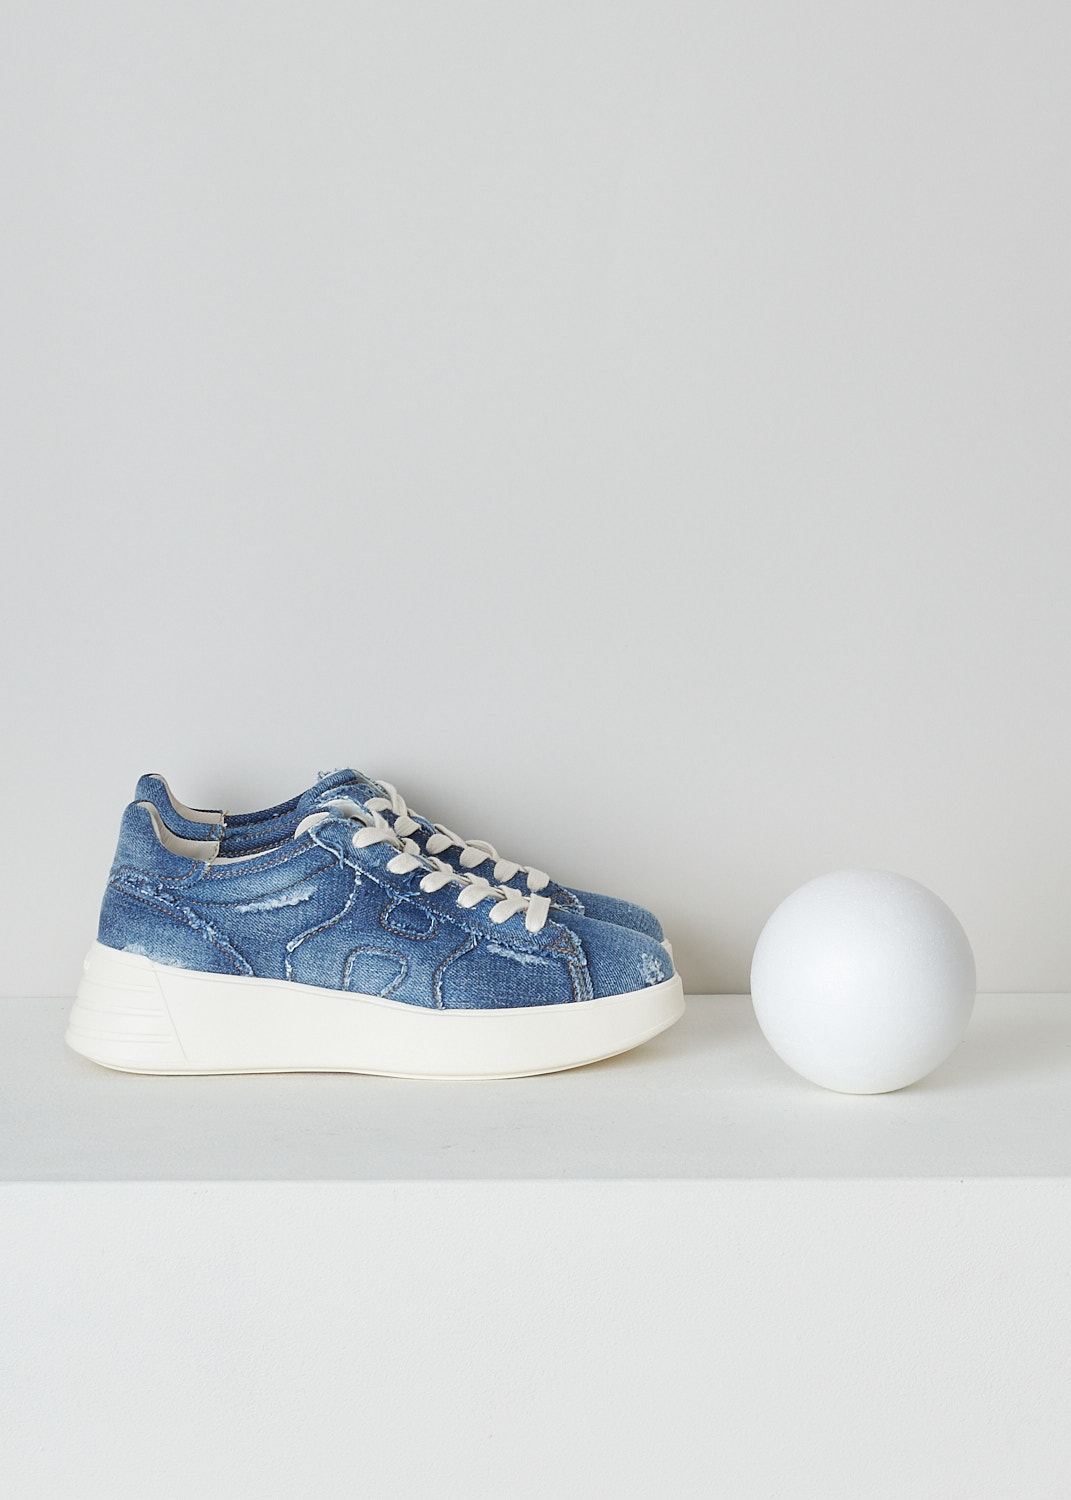 HOGAN, REBEL H562 ALL JEANS SNEAKER, GYW5620EY80JDLU803_H562, Blue, Side, These Rebel H562 All Jeans sneakers are made in a distressed denim fabric. These sneakers have a front lace-up fastening with white laces. These sneakers have a round nose and a broad white rubber sole. On the sides, the brand's H logo is incorporated in the design. The sneakers come with an additional pair of laces in blue. 
